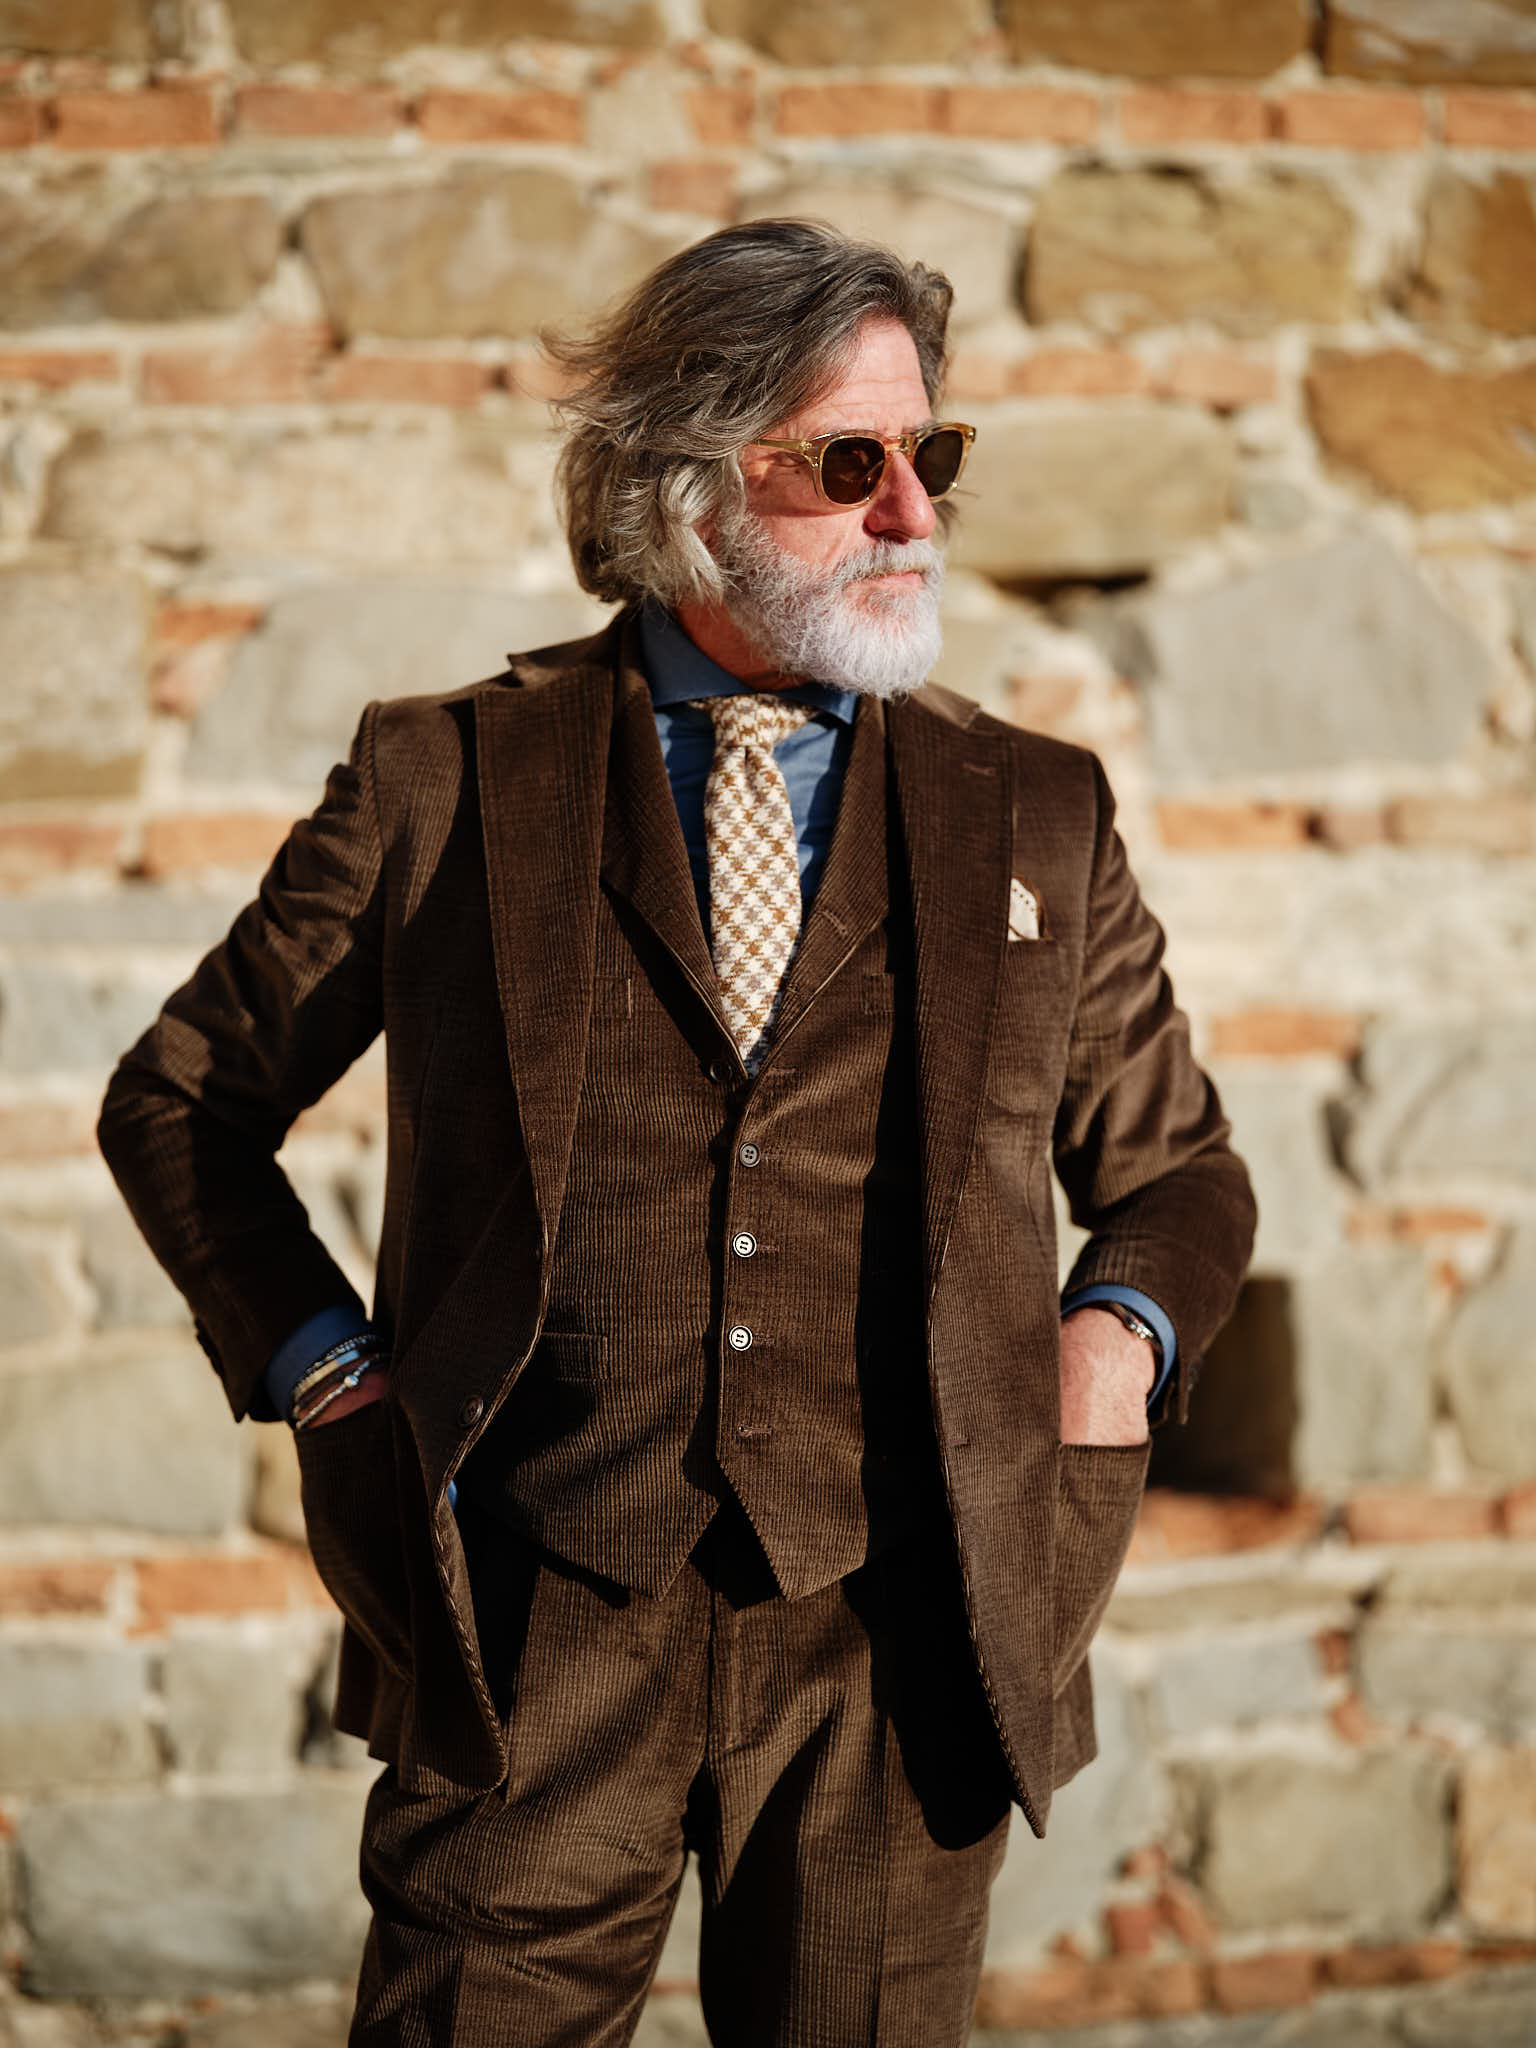 97th edition of Pitti Uomo in Florence: photos from the event ...